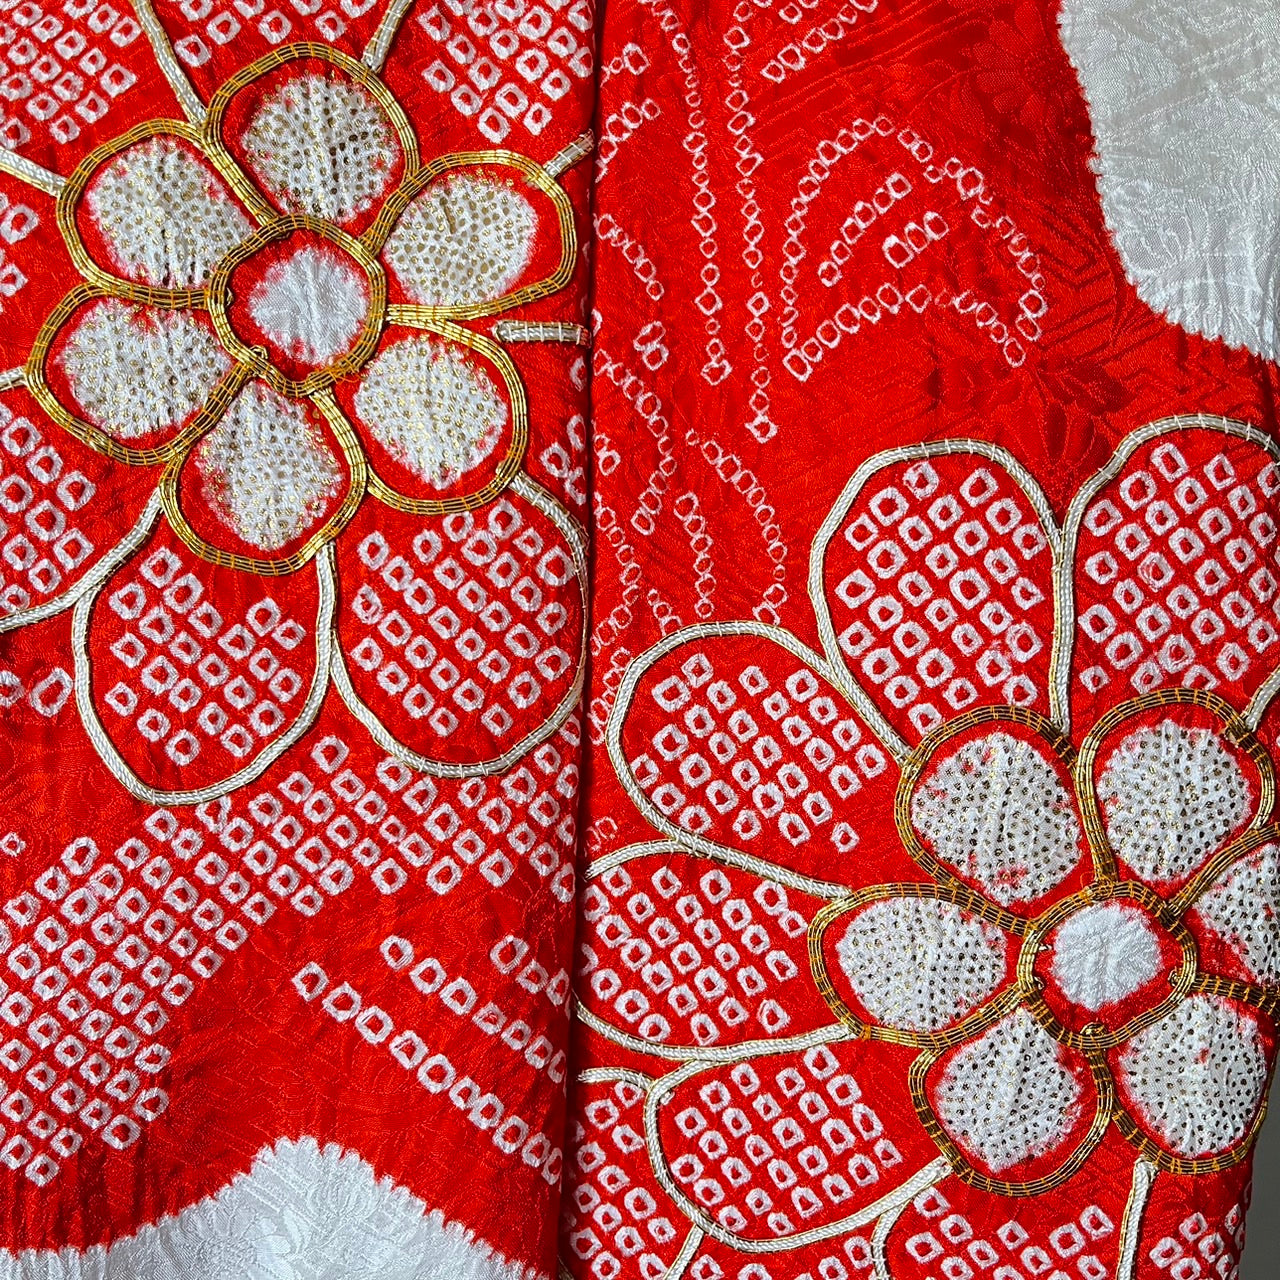 Silk Kimono scarf, Handcrafted, Upcycled, Furisode 振袖, #2033